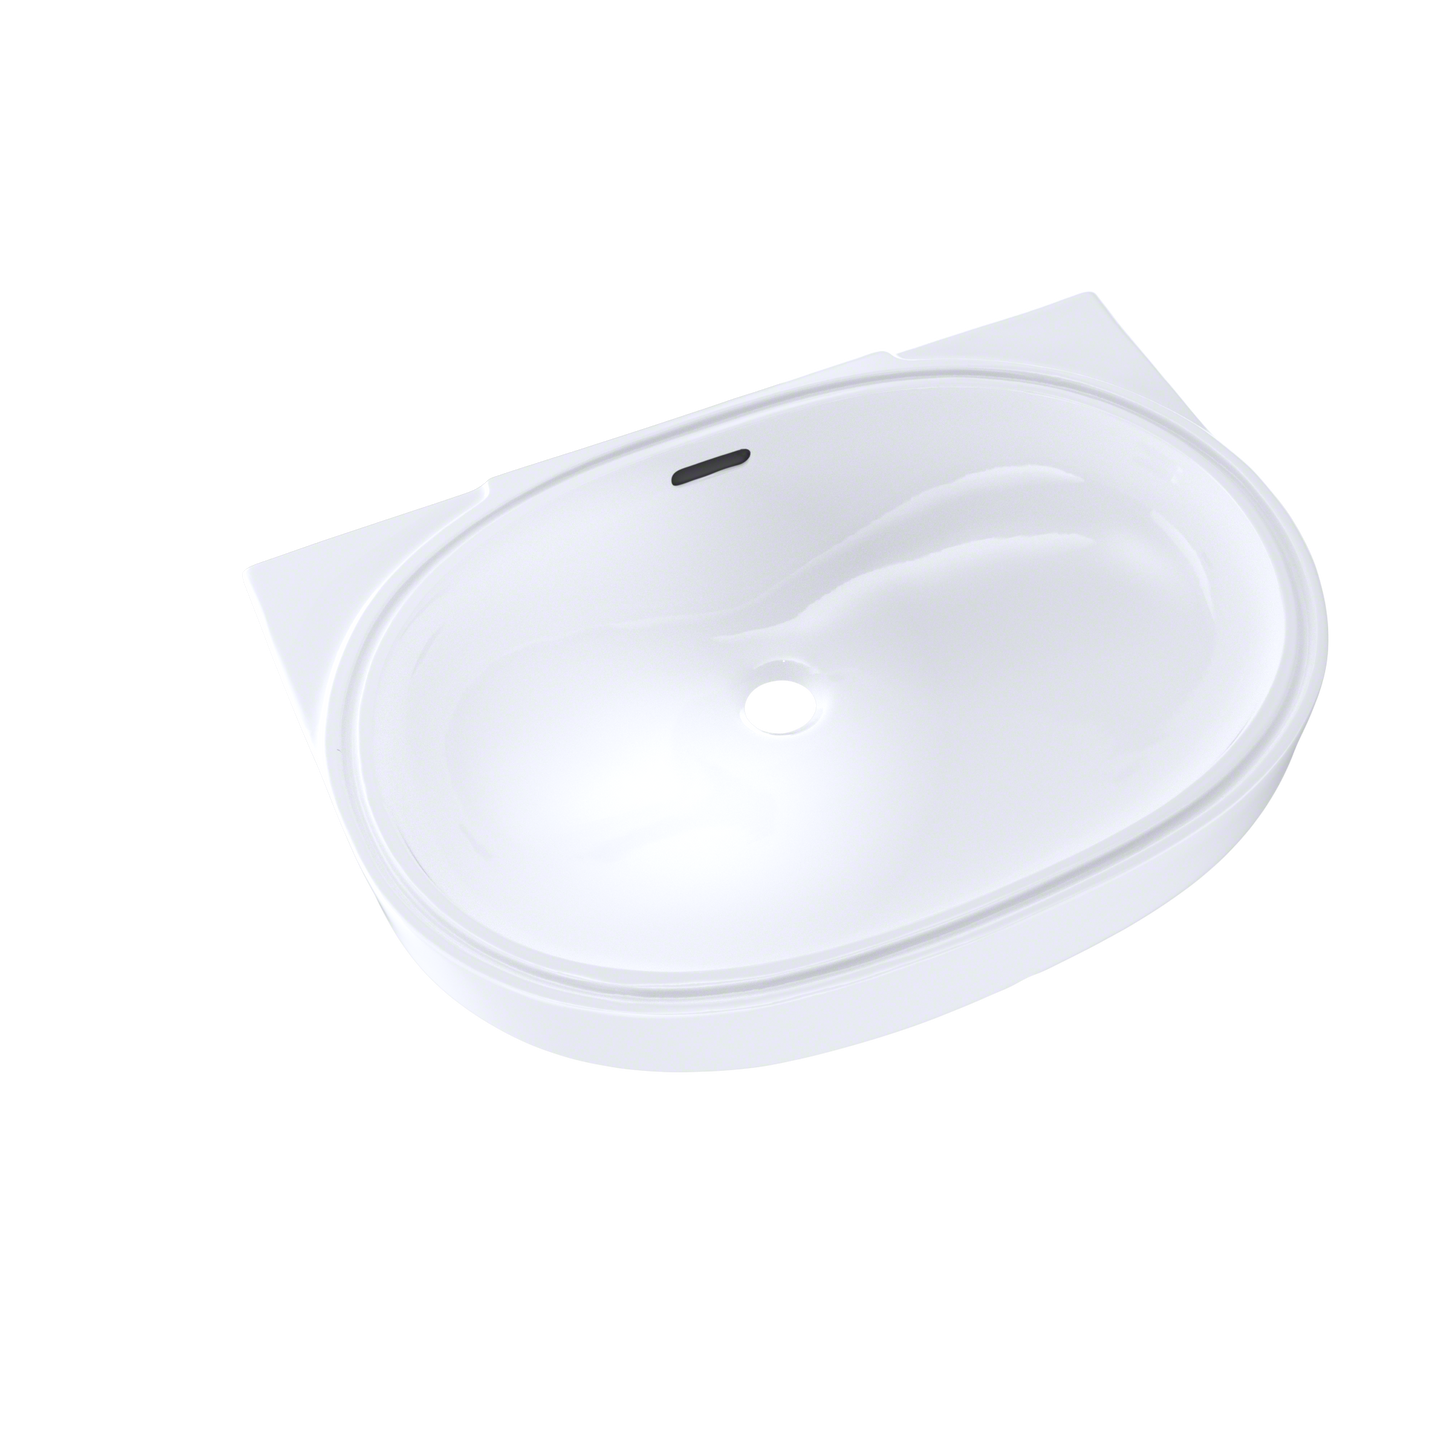 Toto LT546G#01 - Undermount Bathroom Sink with Overflow and CeFiONtect Ceramic Glaze- Cotton